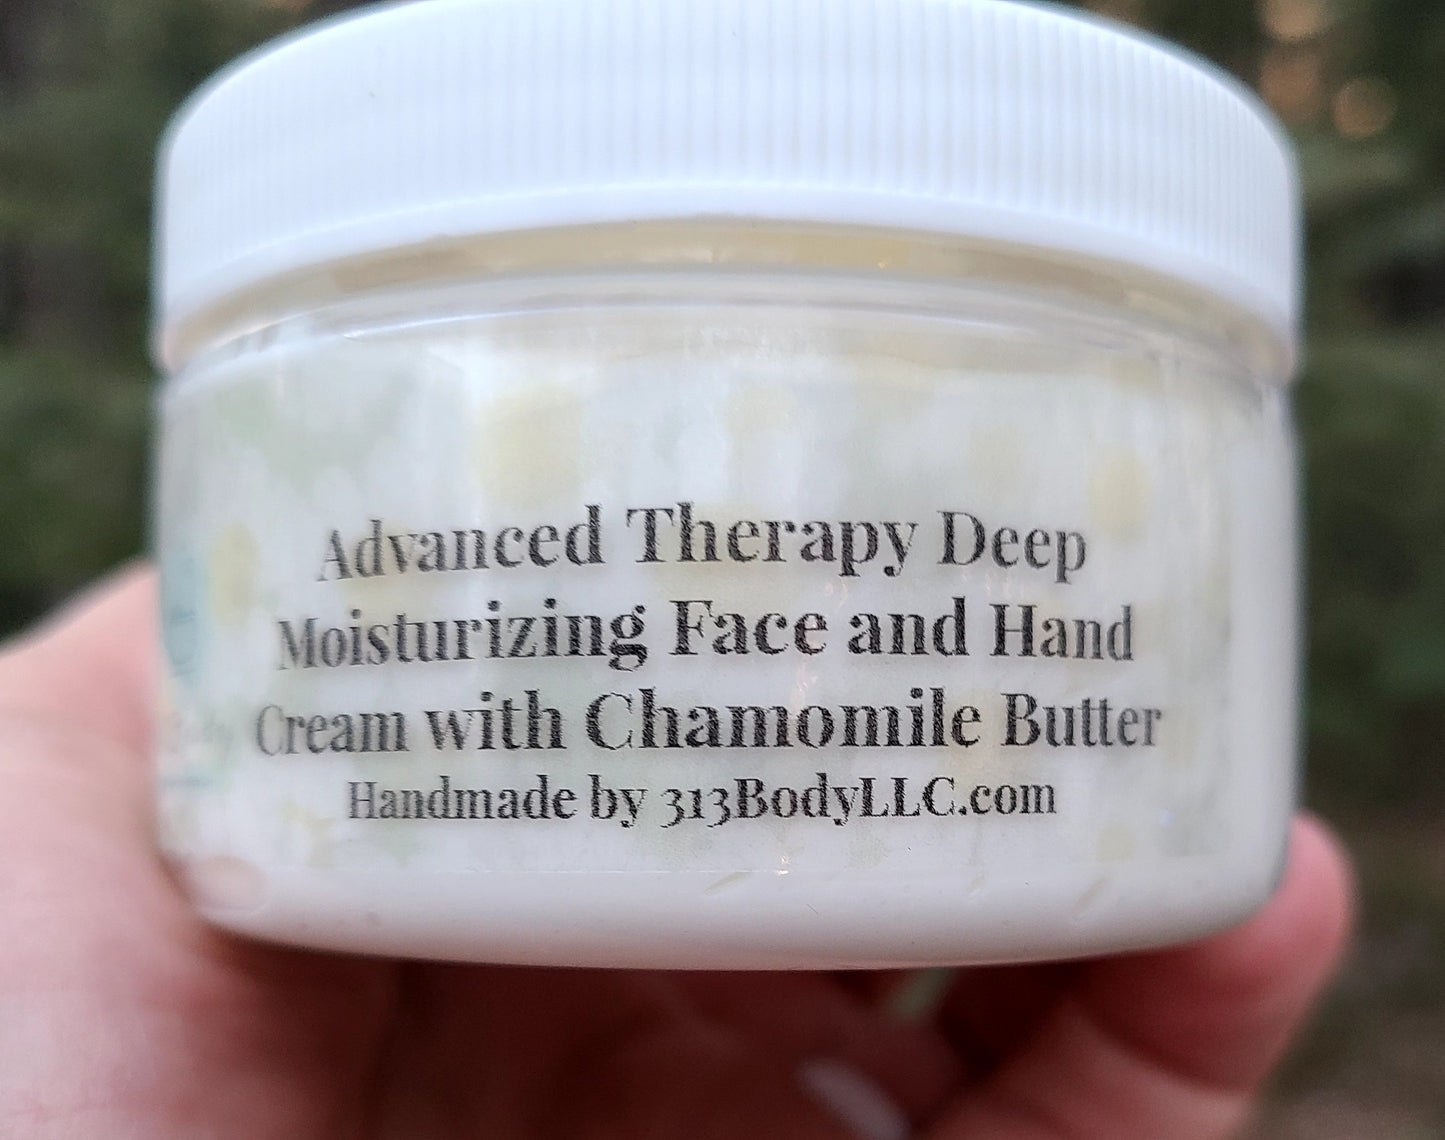 Advanced Therapy Deep Moisturizing Face and Hand Cream with Chamomile Butter